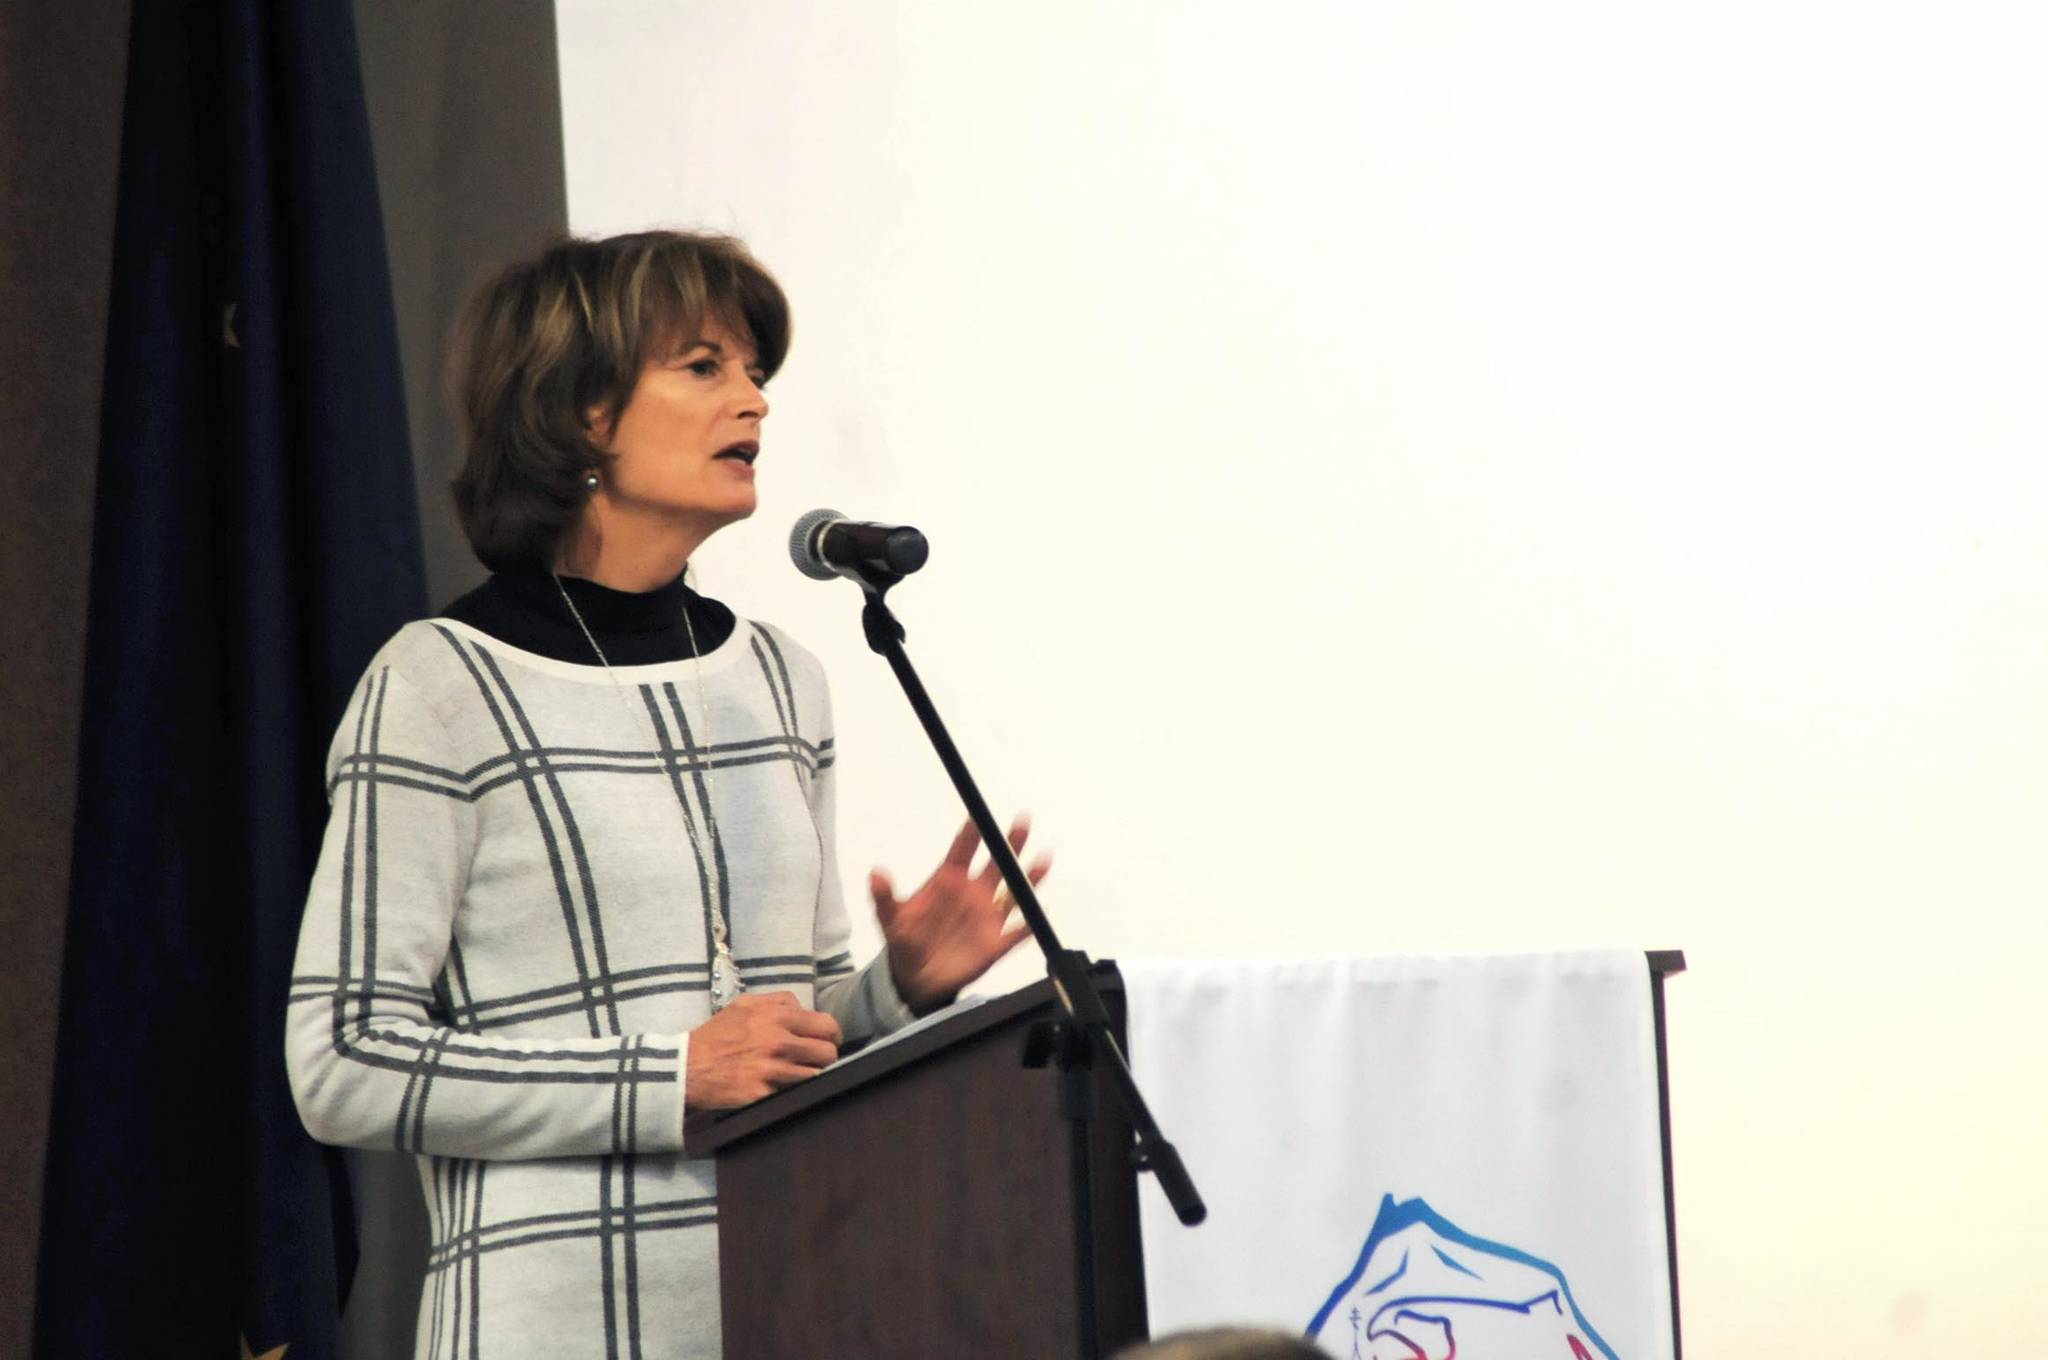 Sen. Lisa Murkowski, R-Alaska (right) speaks at a luncheon of the joint Kenai and Soldotna chambers of commerce on Friday, Feb. 2, 2018 in Kenai, Alaska. Murkowski said there were reasons to be optimistic about Alaska’s economic future, though there’s still work to be done in Washington, D.C., such as a budget solution before the current continuing resolution expires on Feb. 8. (Photo by Elizabeth Earl/Peninsula Clarion)